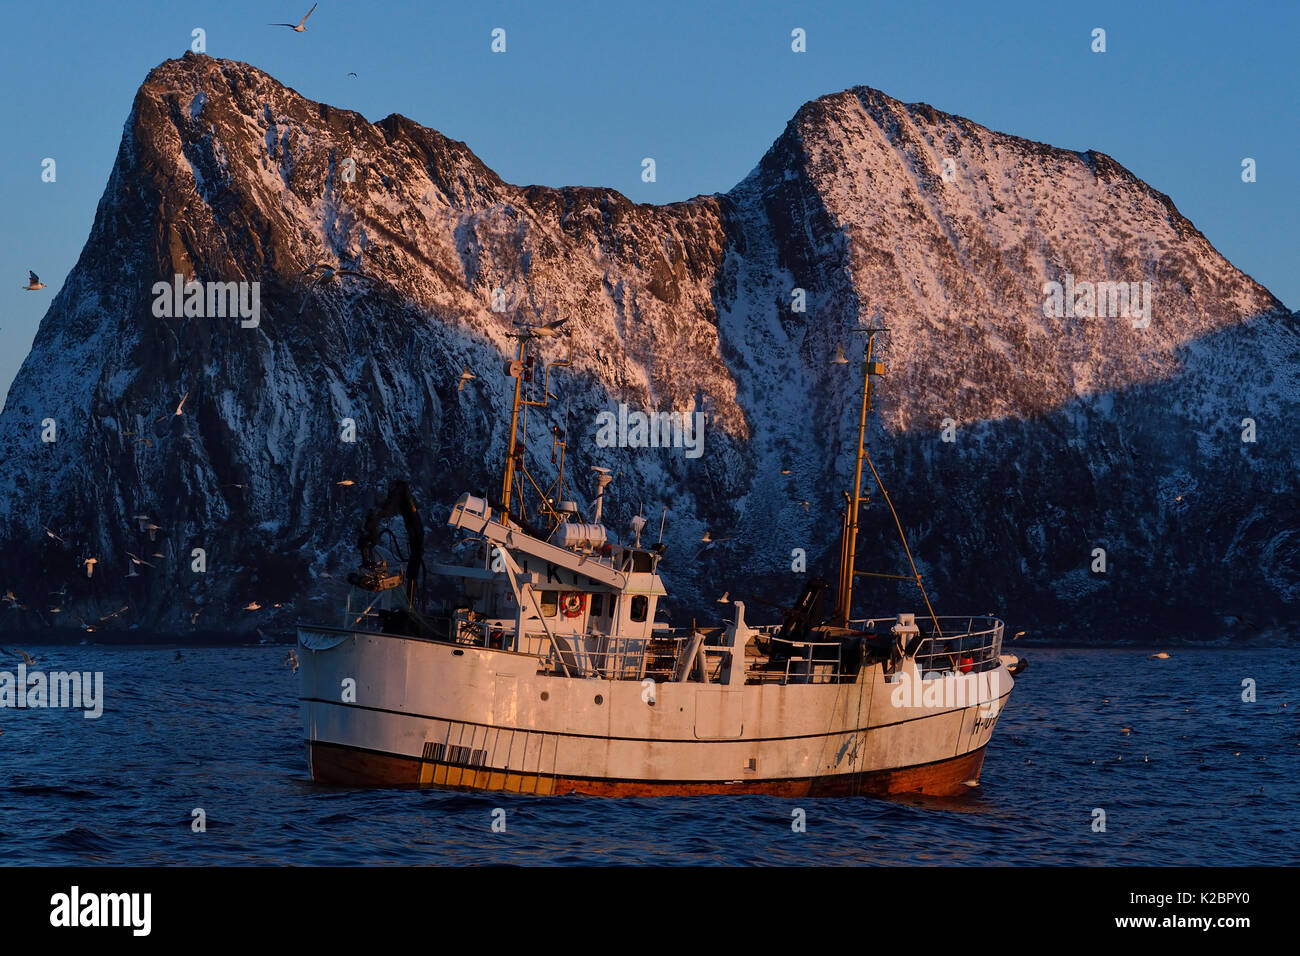 Fishing boat fishing for Cod (Gadus morhua), that come to feed on herring in the winter, Senja, Troms county, Norway, January 2015. All non-editorial uses must be cleared individually. Stock Photo